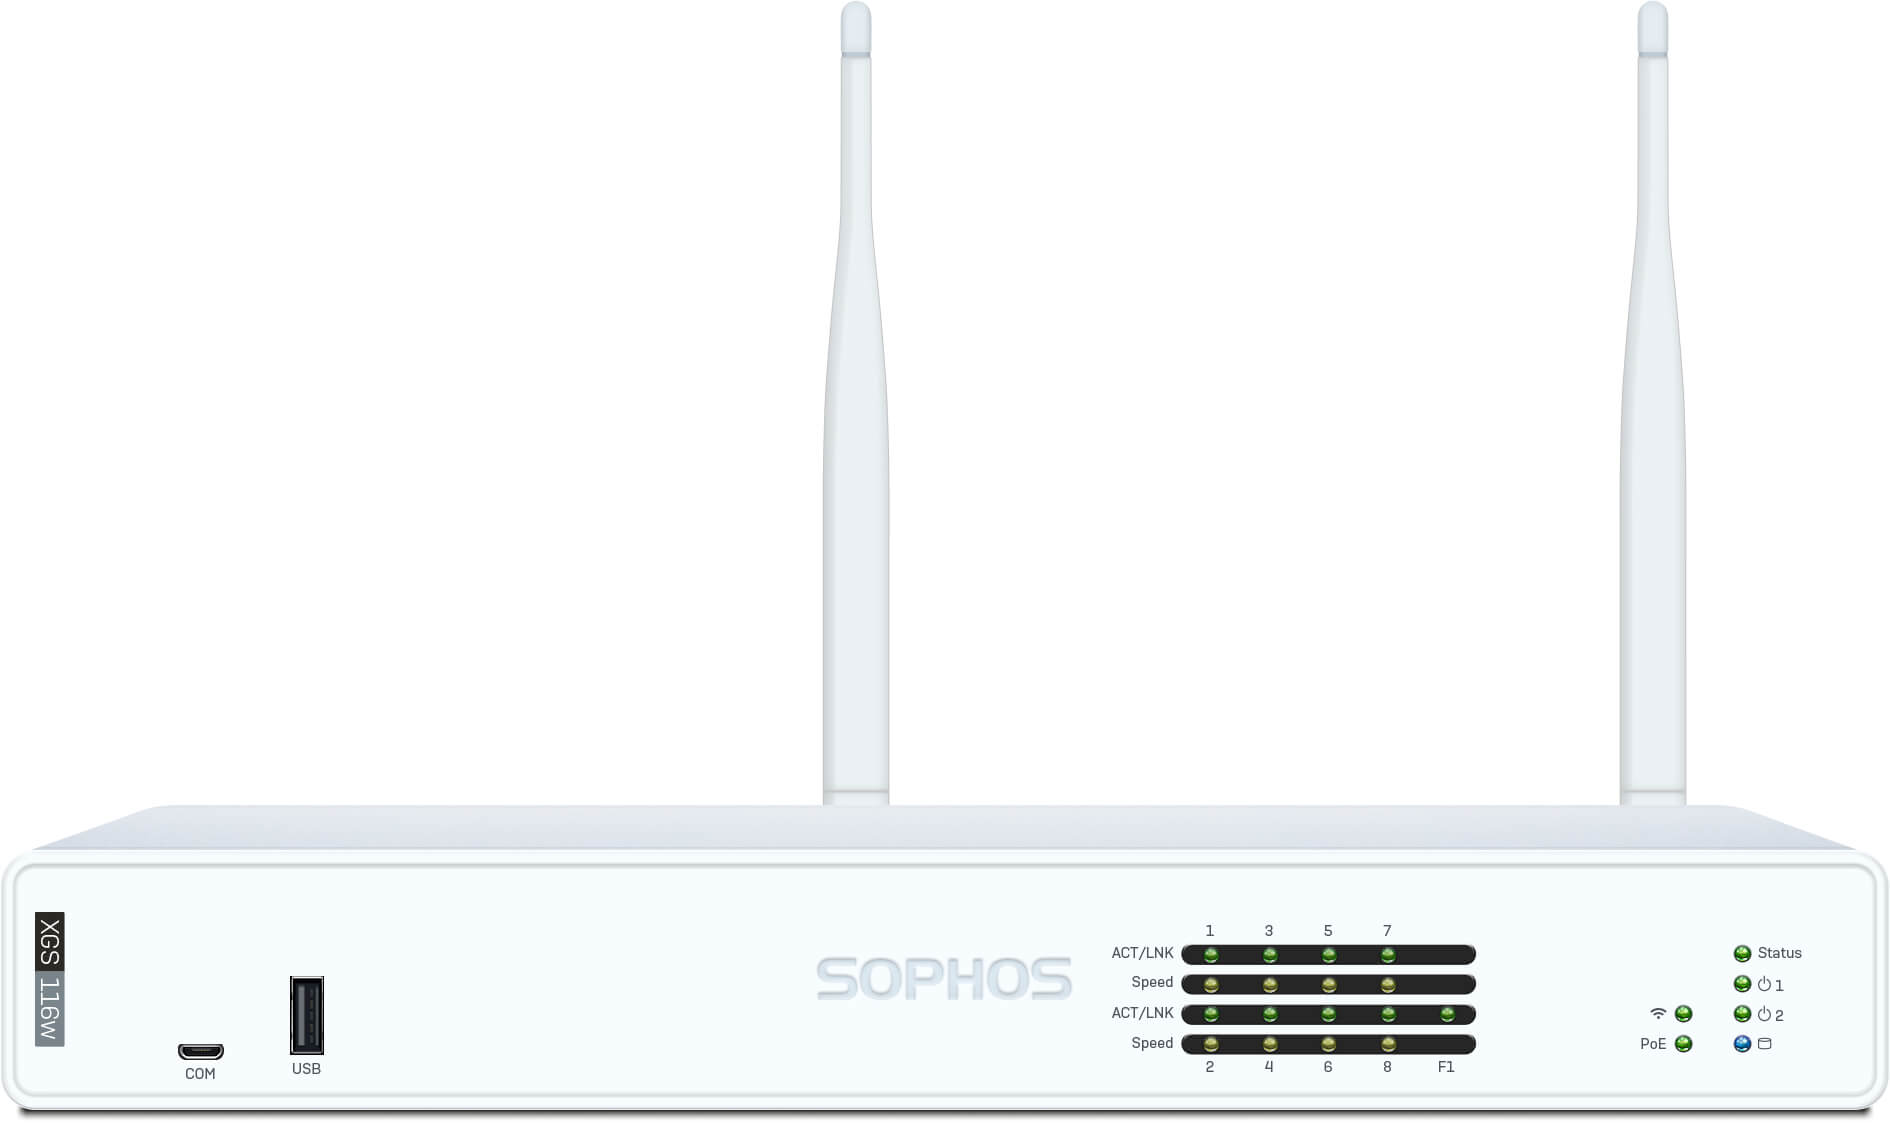 Sophos XGS 116w mit Standard Protection